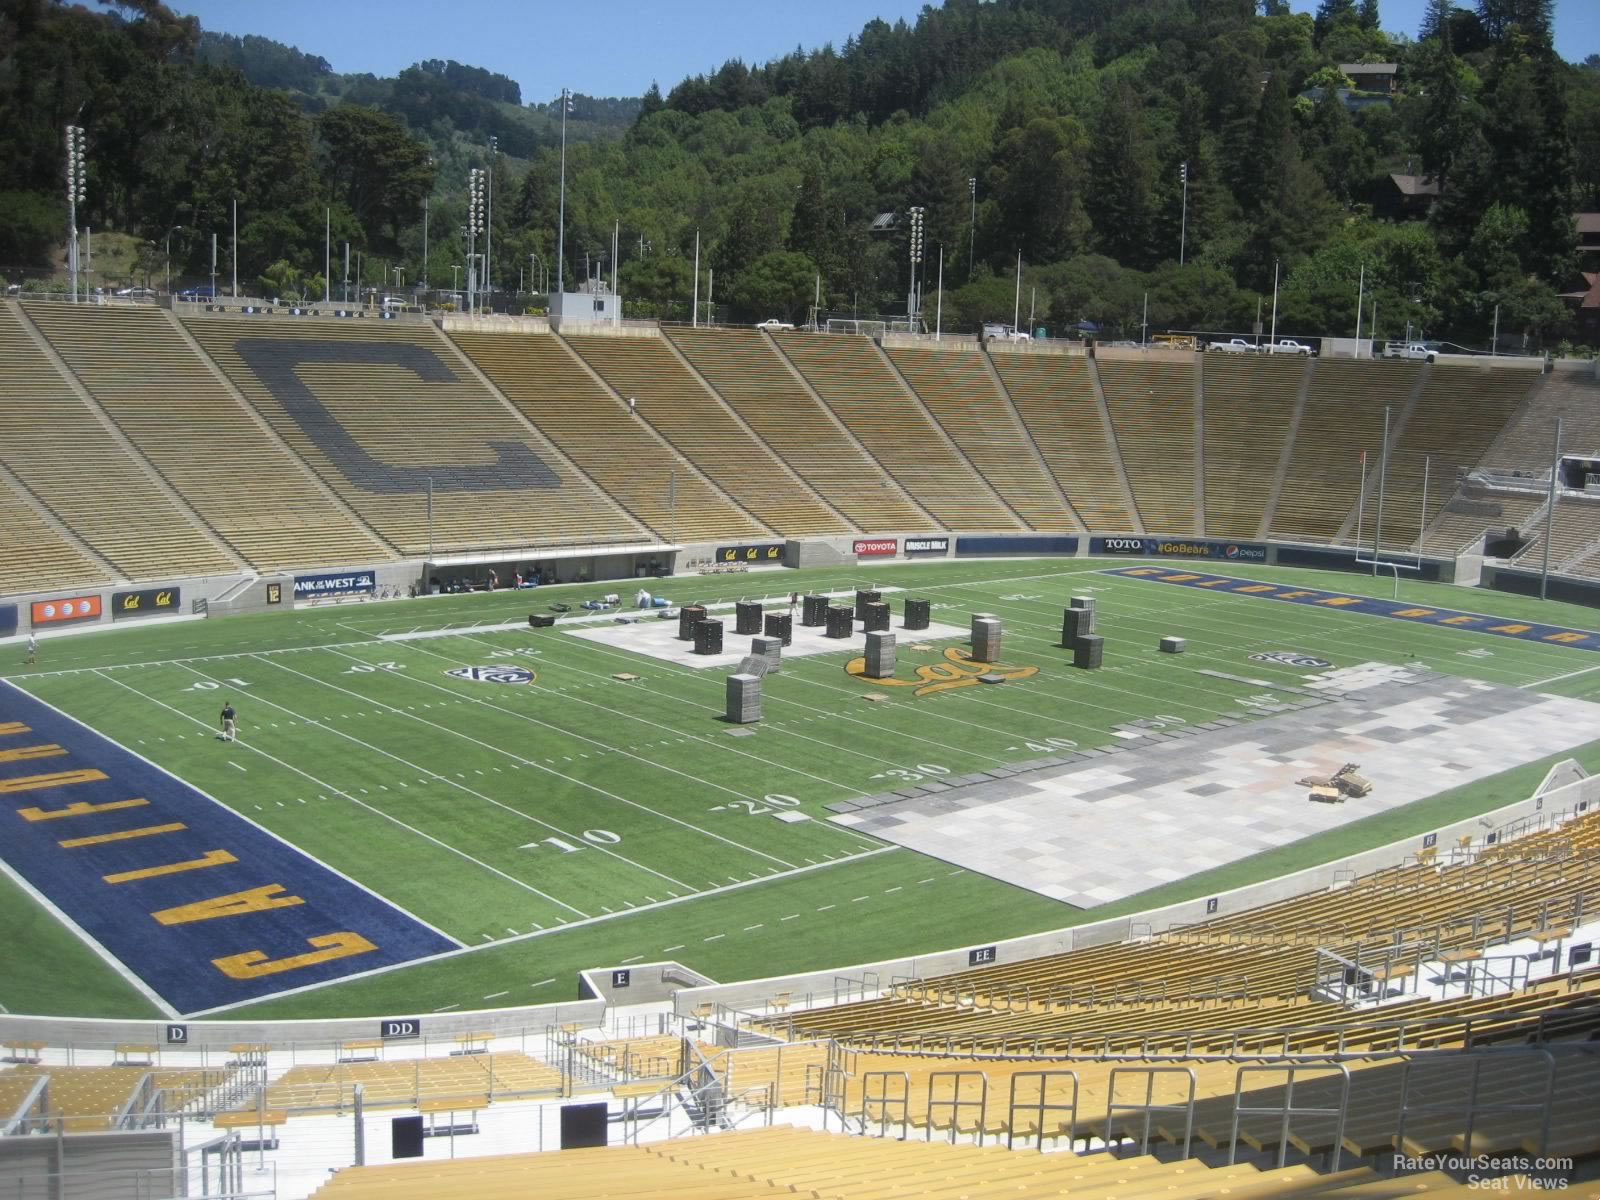 section dd, row 65 seat view  - memorial stadium (cal)